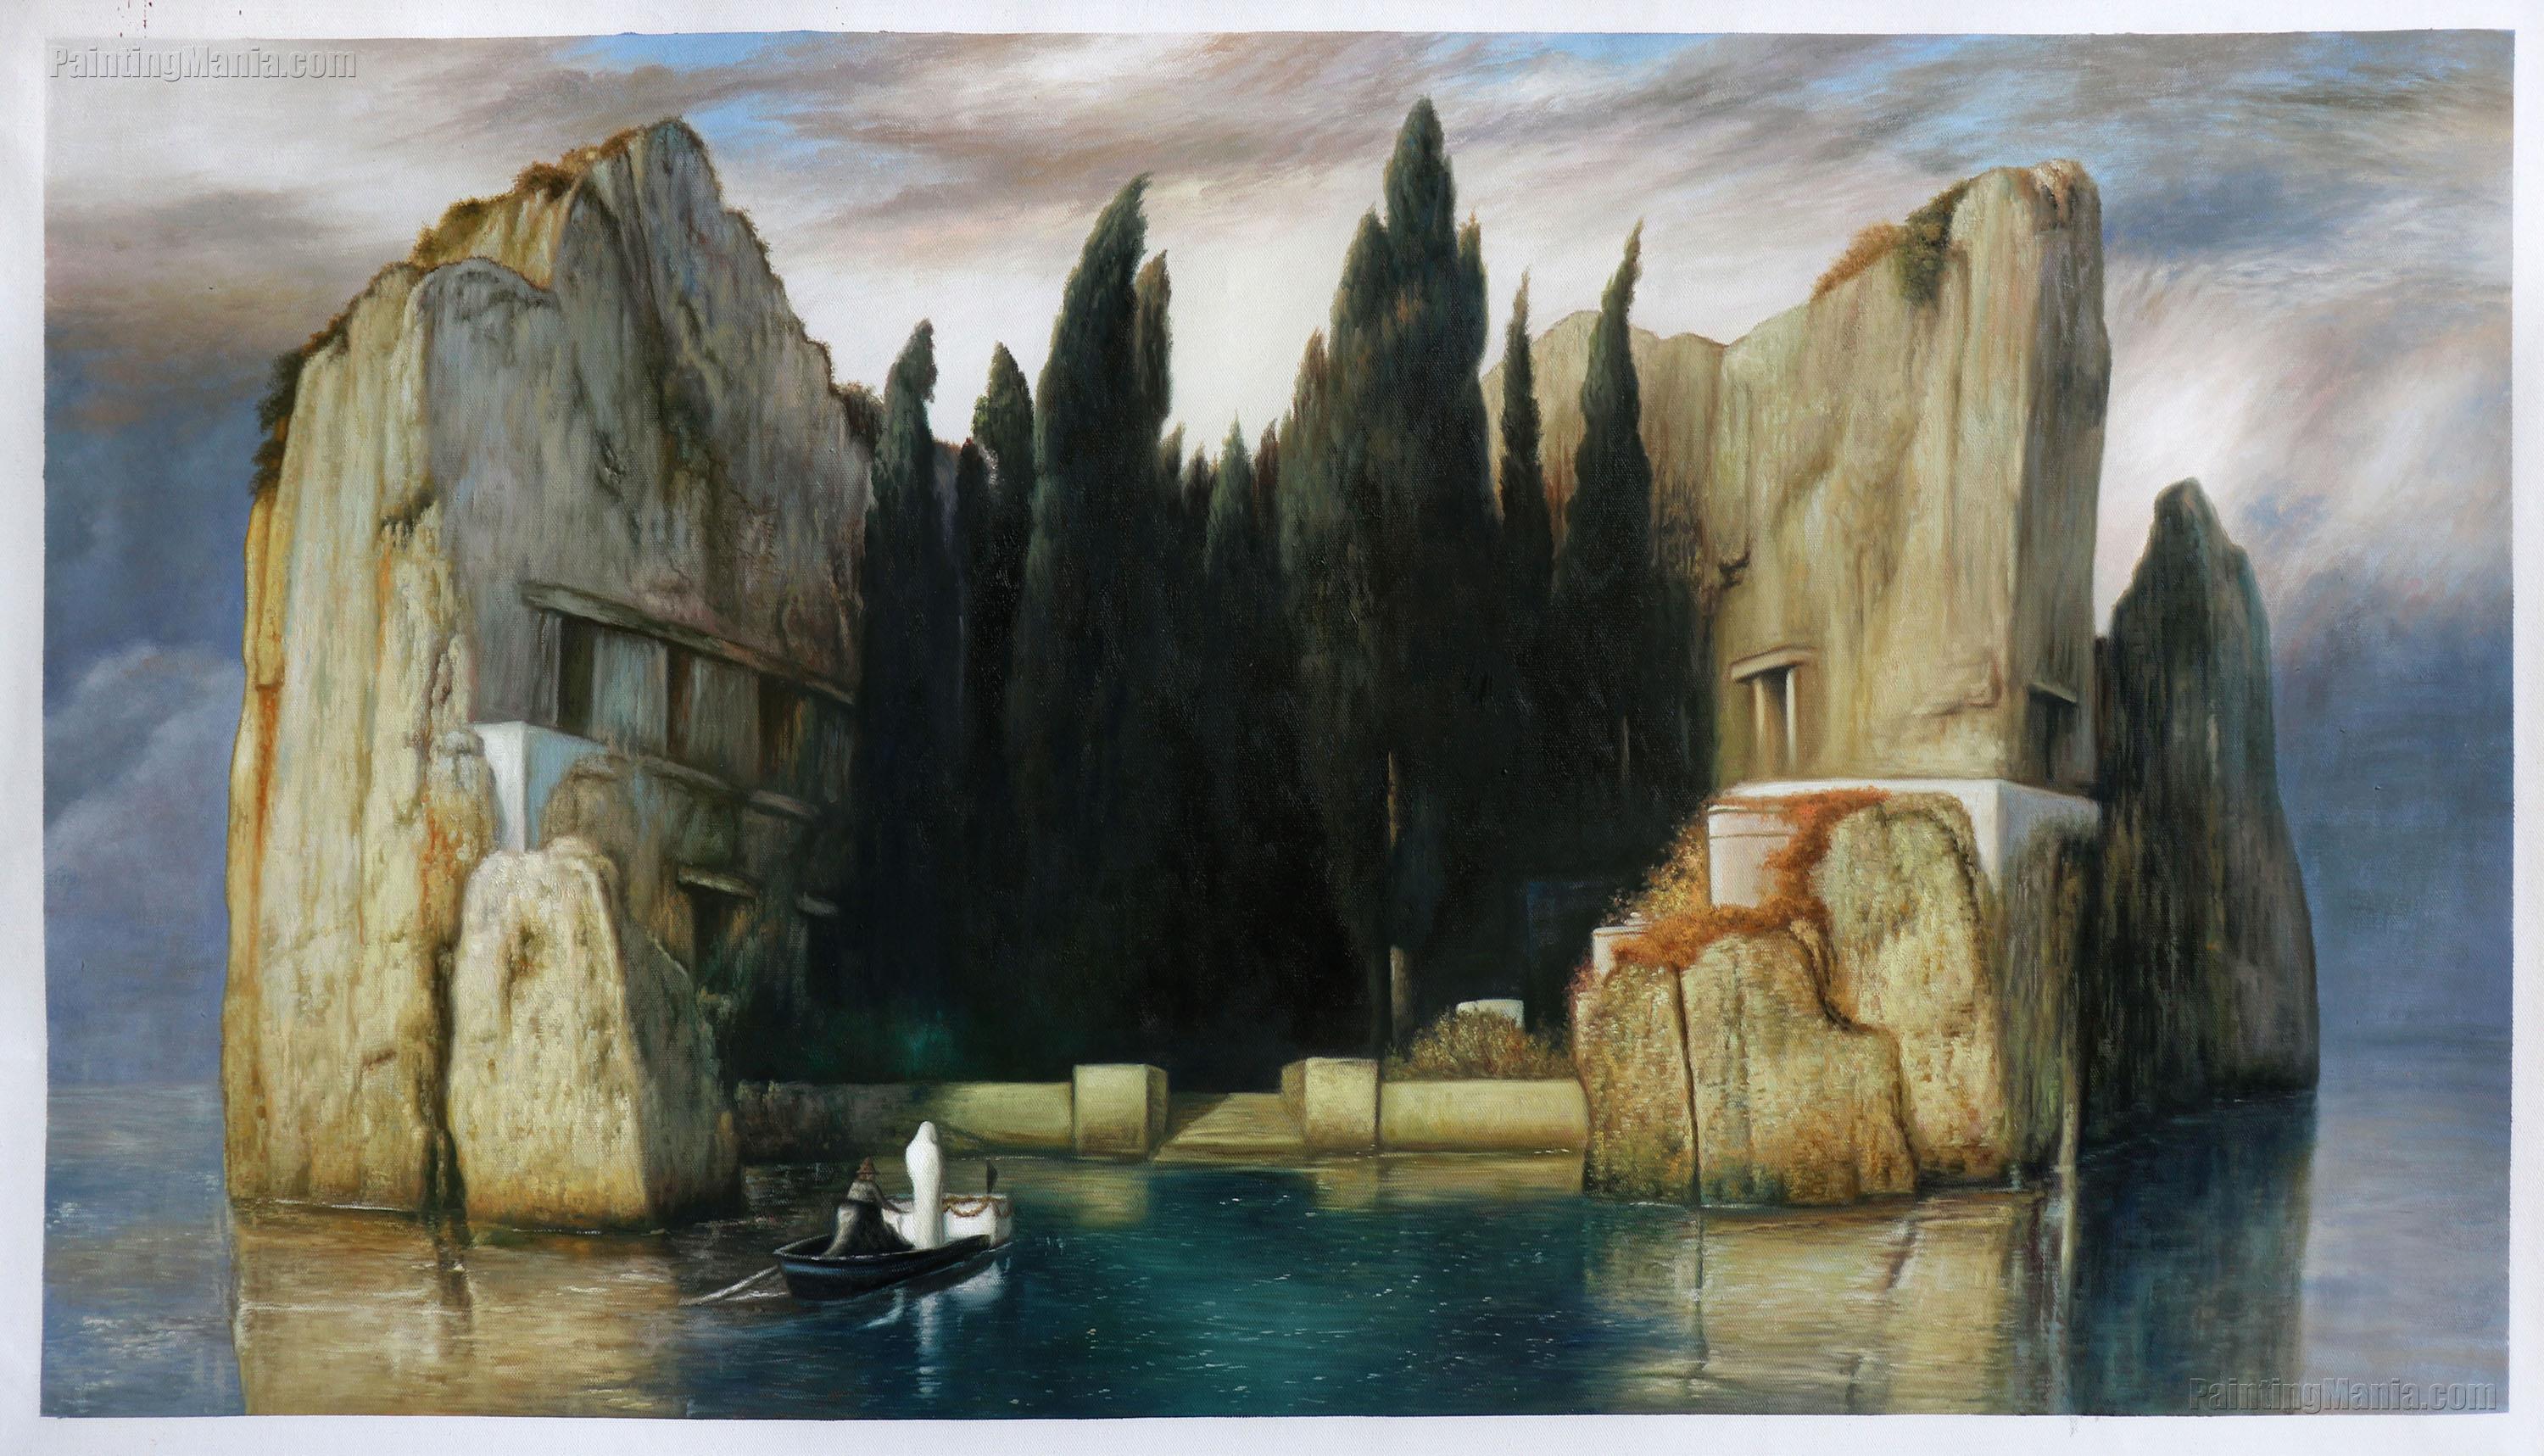 Isle of the Dead (Toteninsel) by Arnold Bocklin